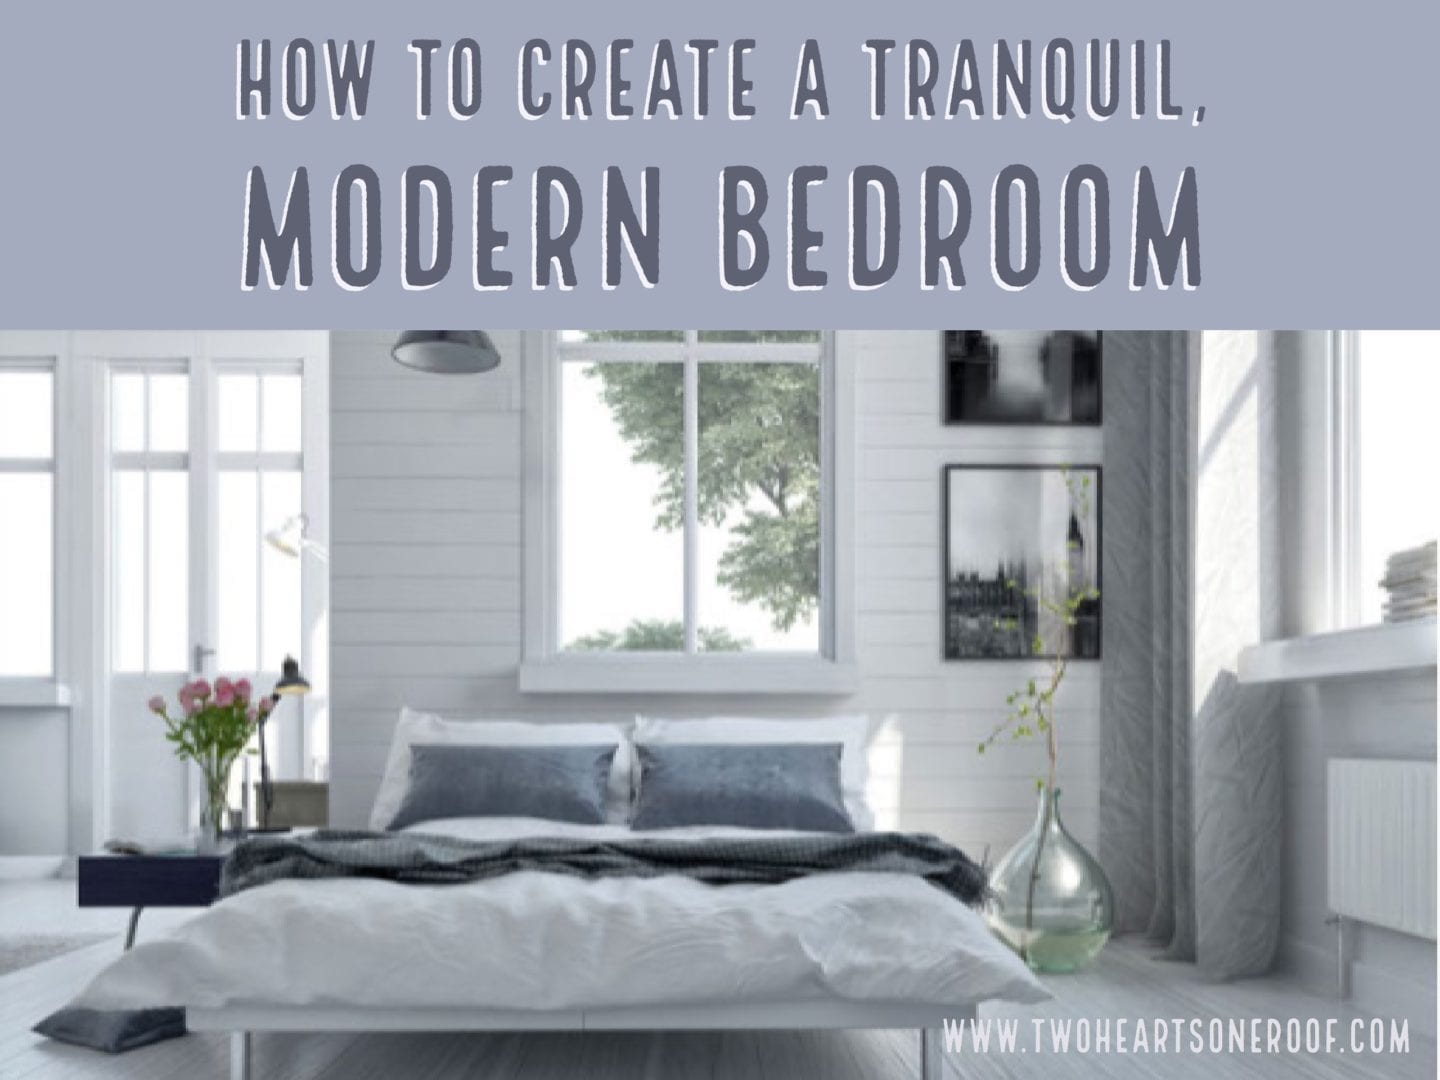 How to Create a Tranquil, Modern Bedroom